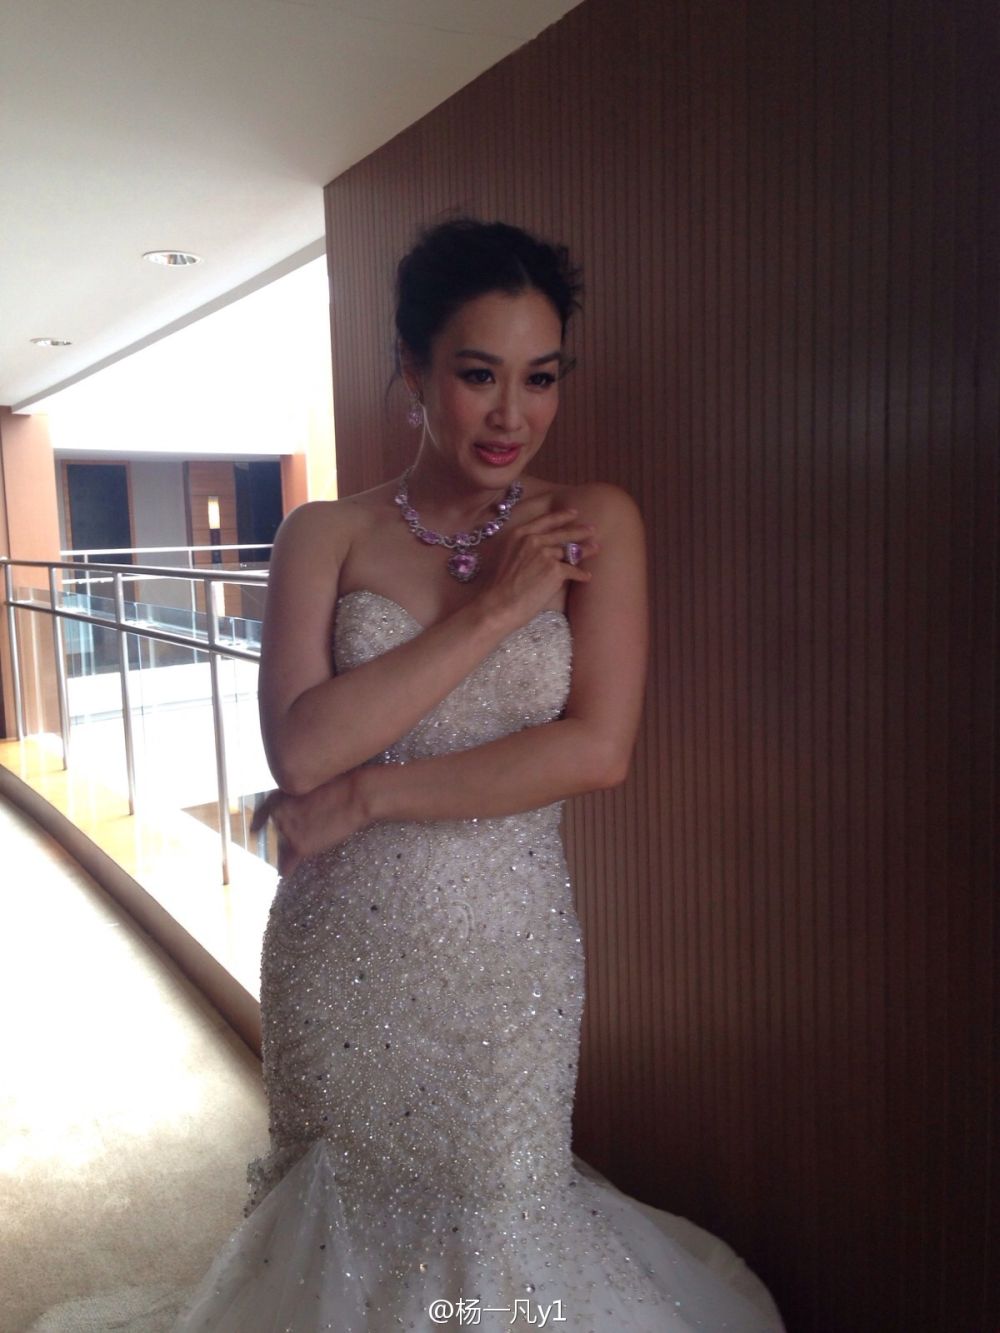 Christy Chung Sexy and Hottest Photos , Latest Pics